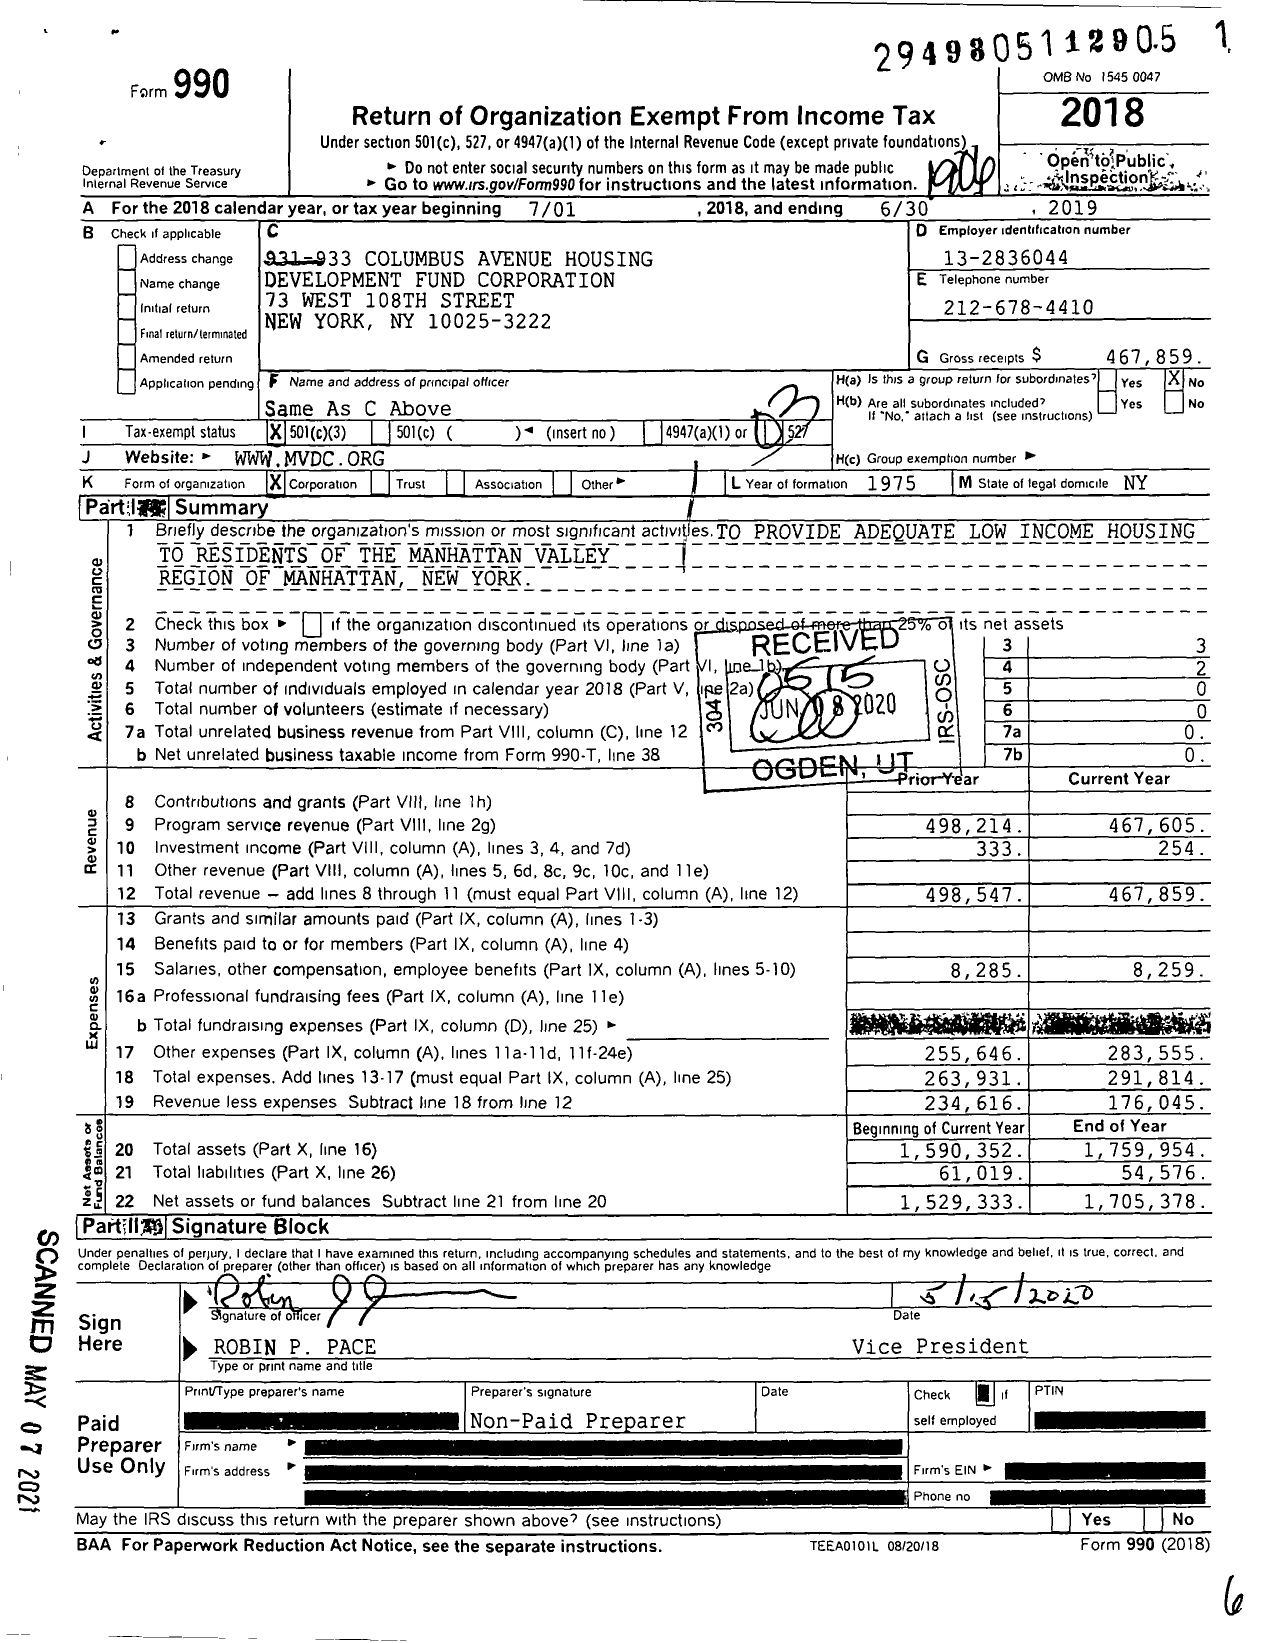 Image of first page of 2018 Form 990 for 931-933 Columbus Avenue Housing Development Fund Corporation